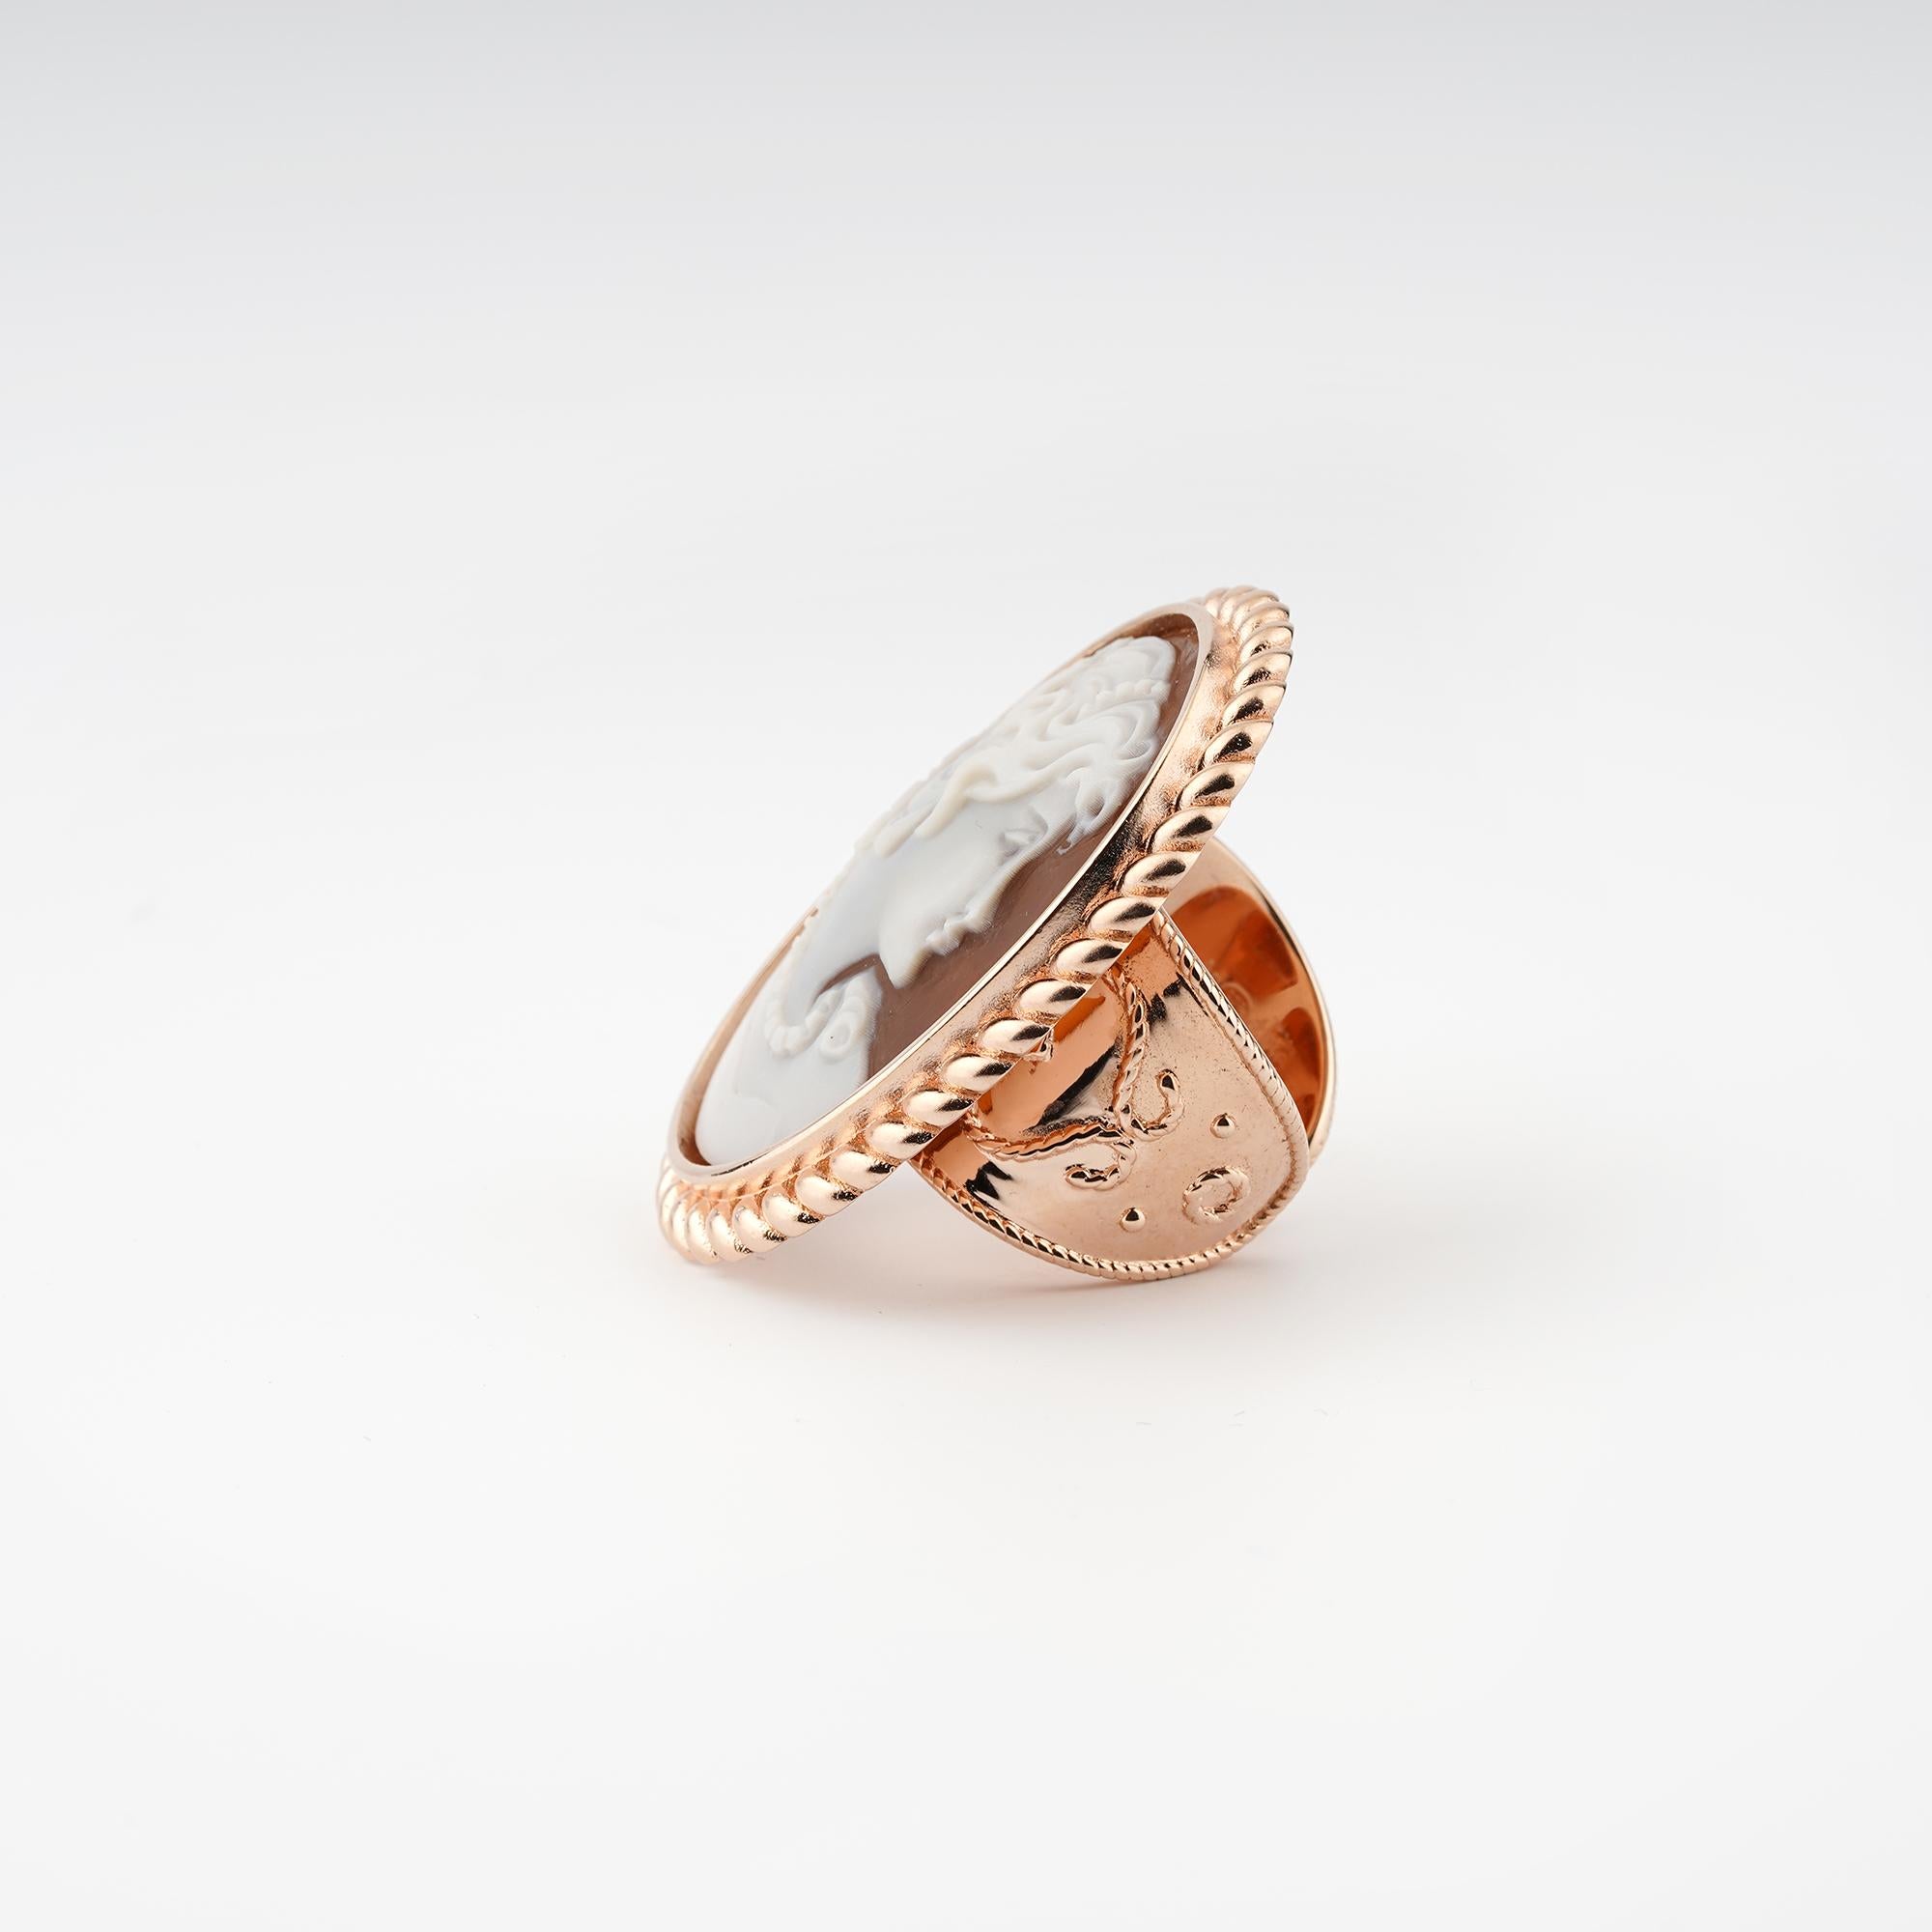 18 carat Rose Gold Plated 925 Sterling Silver with 38mm Sea Shell Cameo adjustable ring. Fully handcarved Portrait on a sea shell cameo set in a 18kt Rose Gold plated silver adjustable shank ring. Carvings are performed by our master artisans with